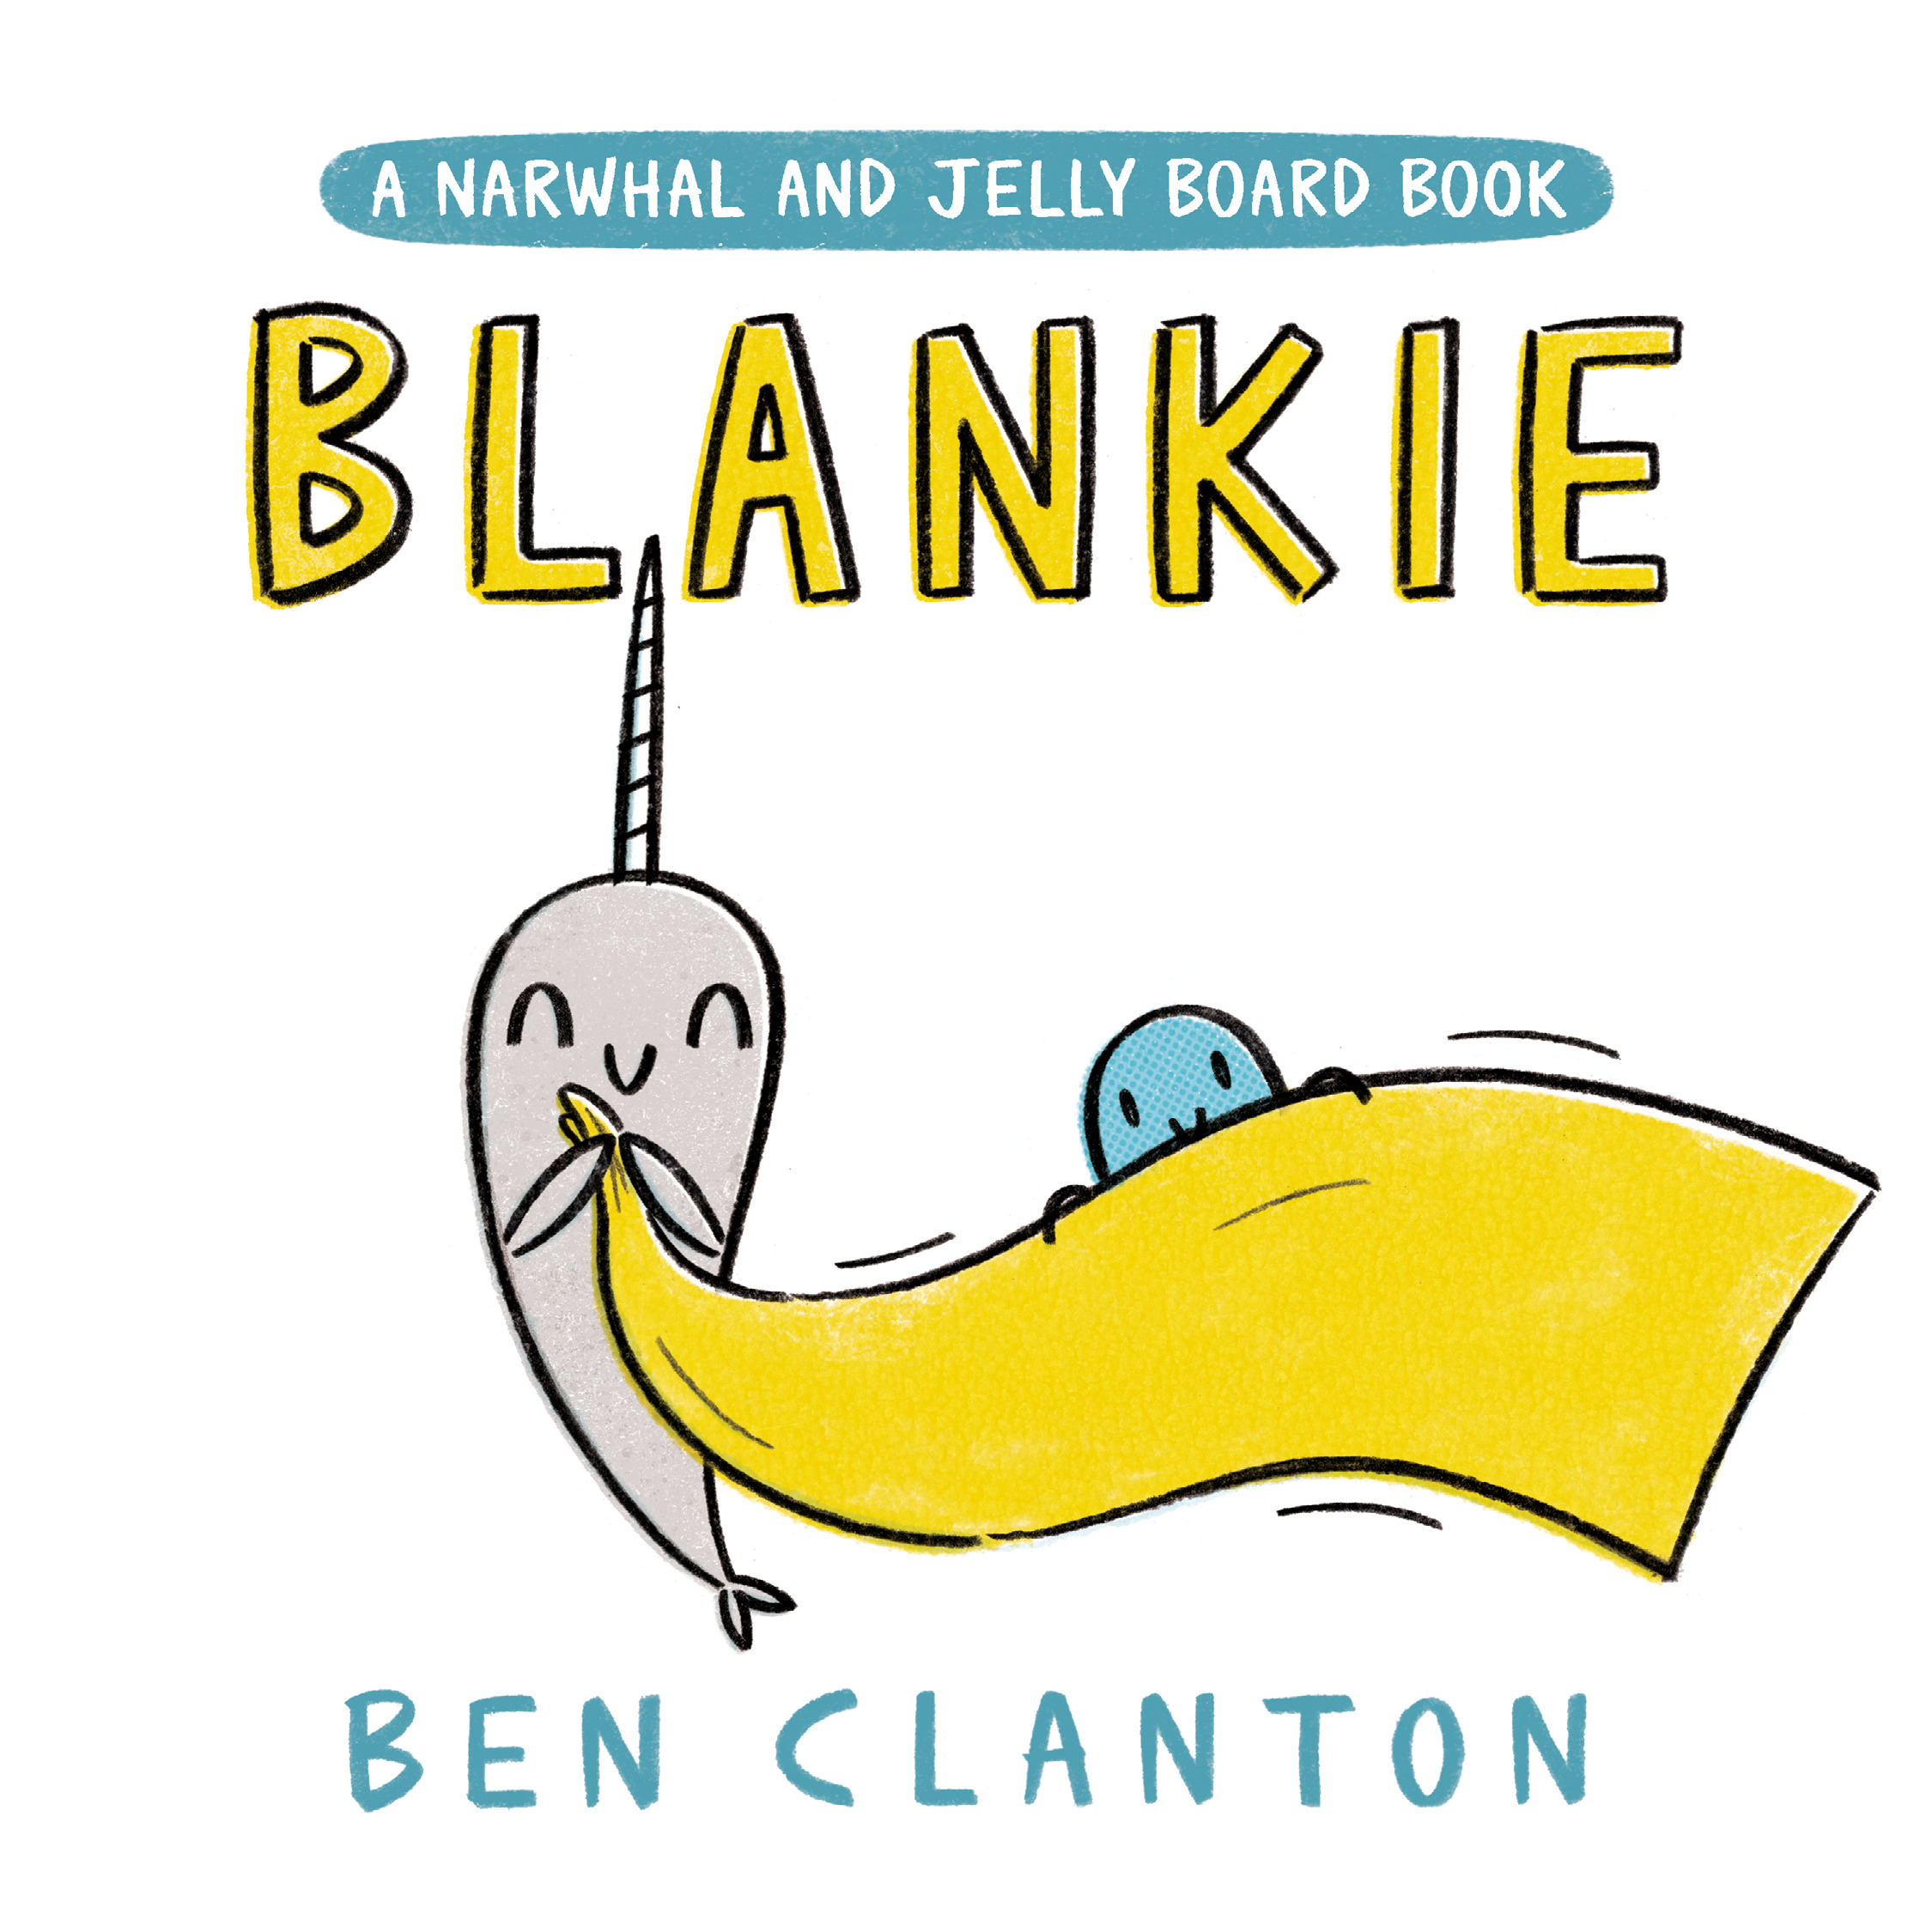 Blankie (A Narwhal and Jelly Board Book) | Clanton, Ben